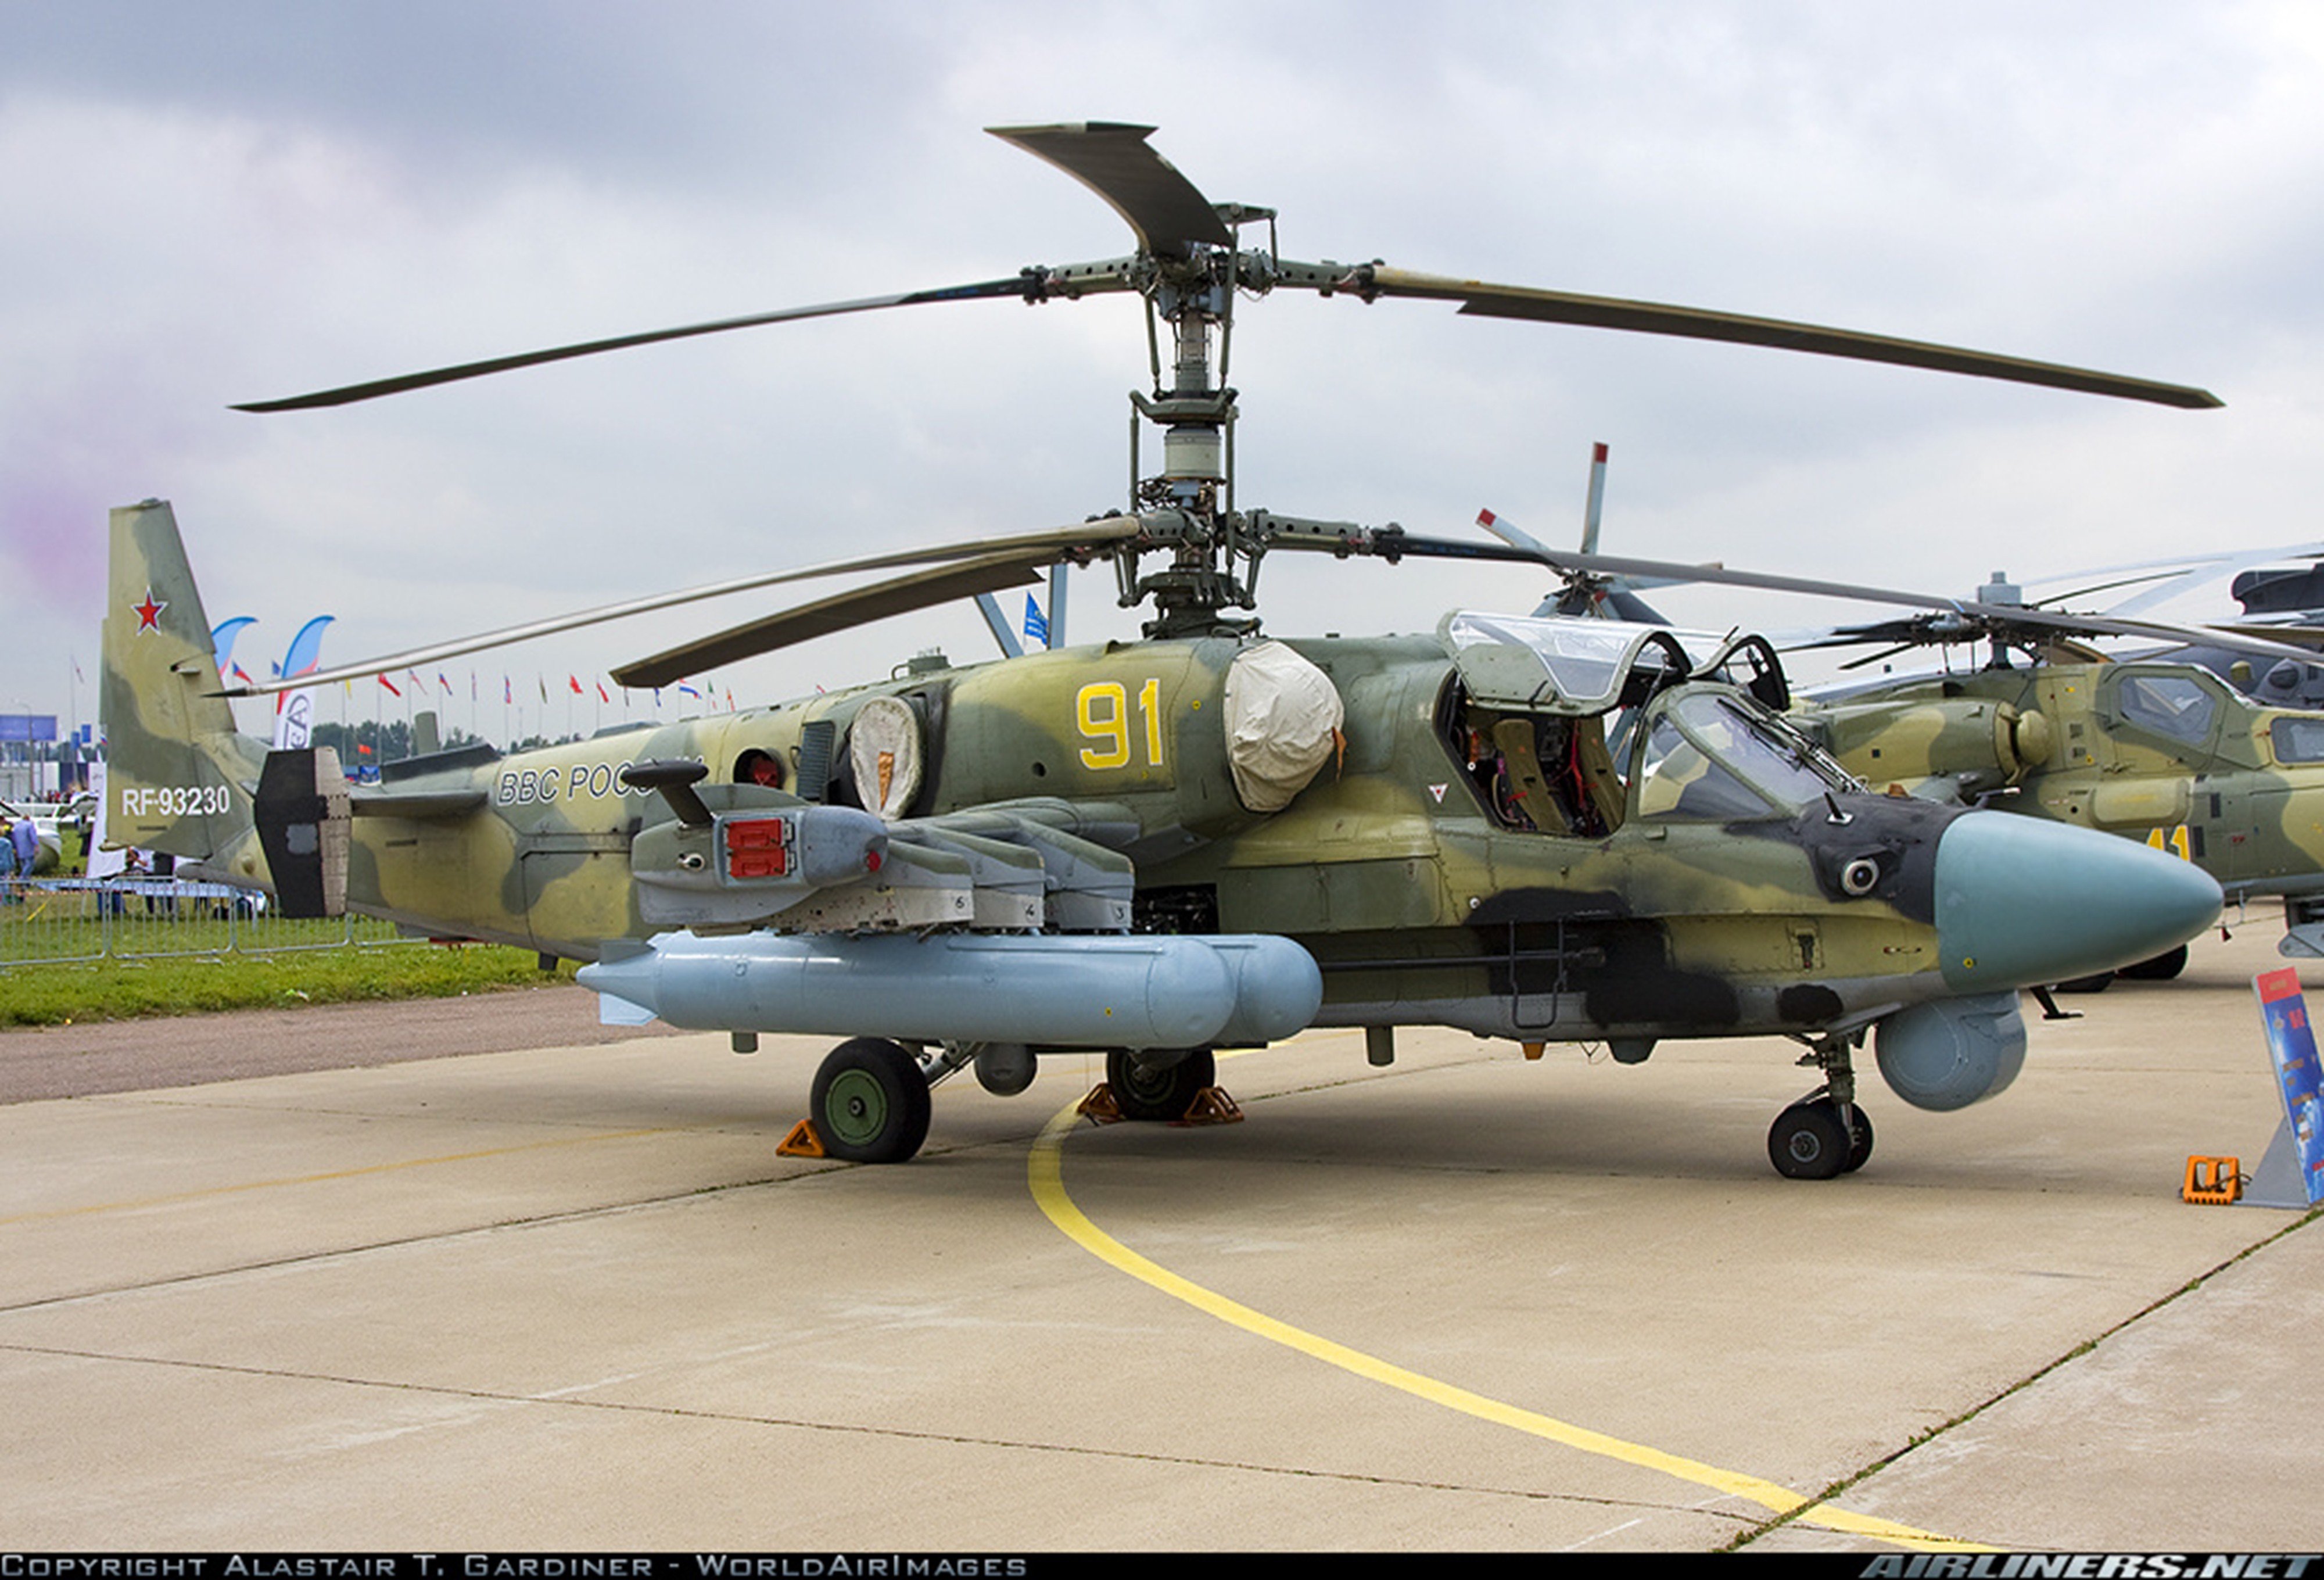 Kamov, Ka 52, Alligator, Russian, Red, Star, Russia, Helicopter, Aircraft, Attack, Military, Arm ...